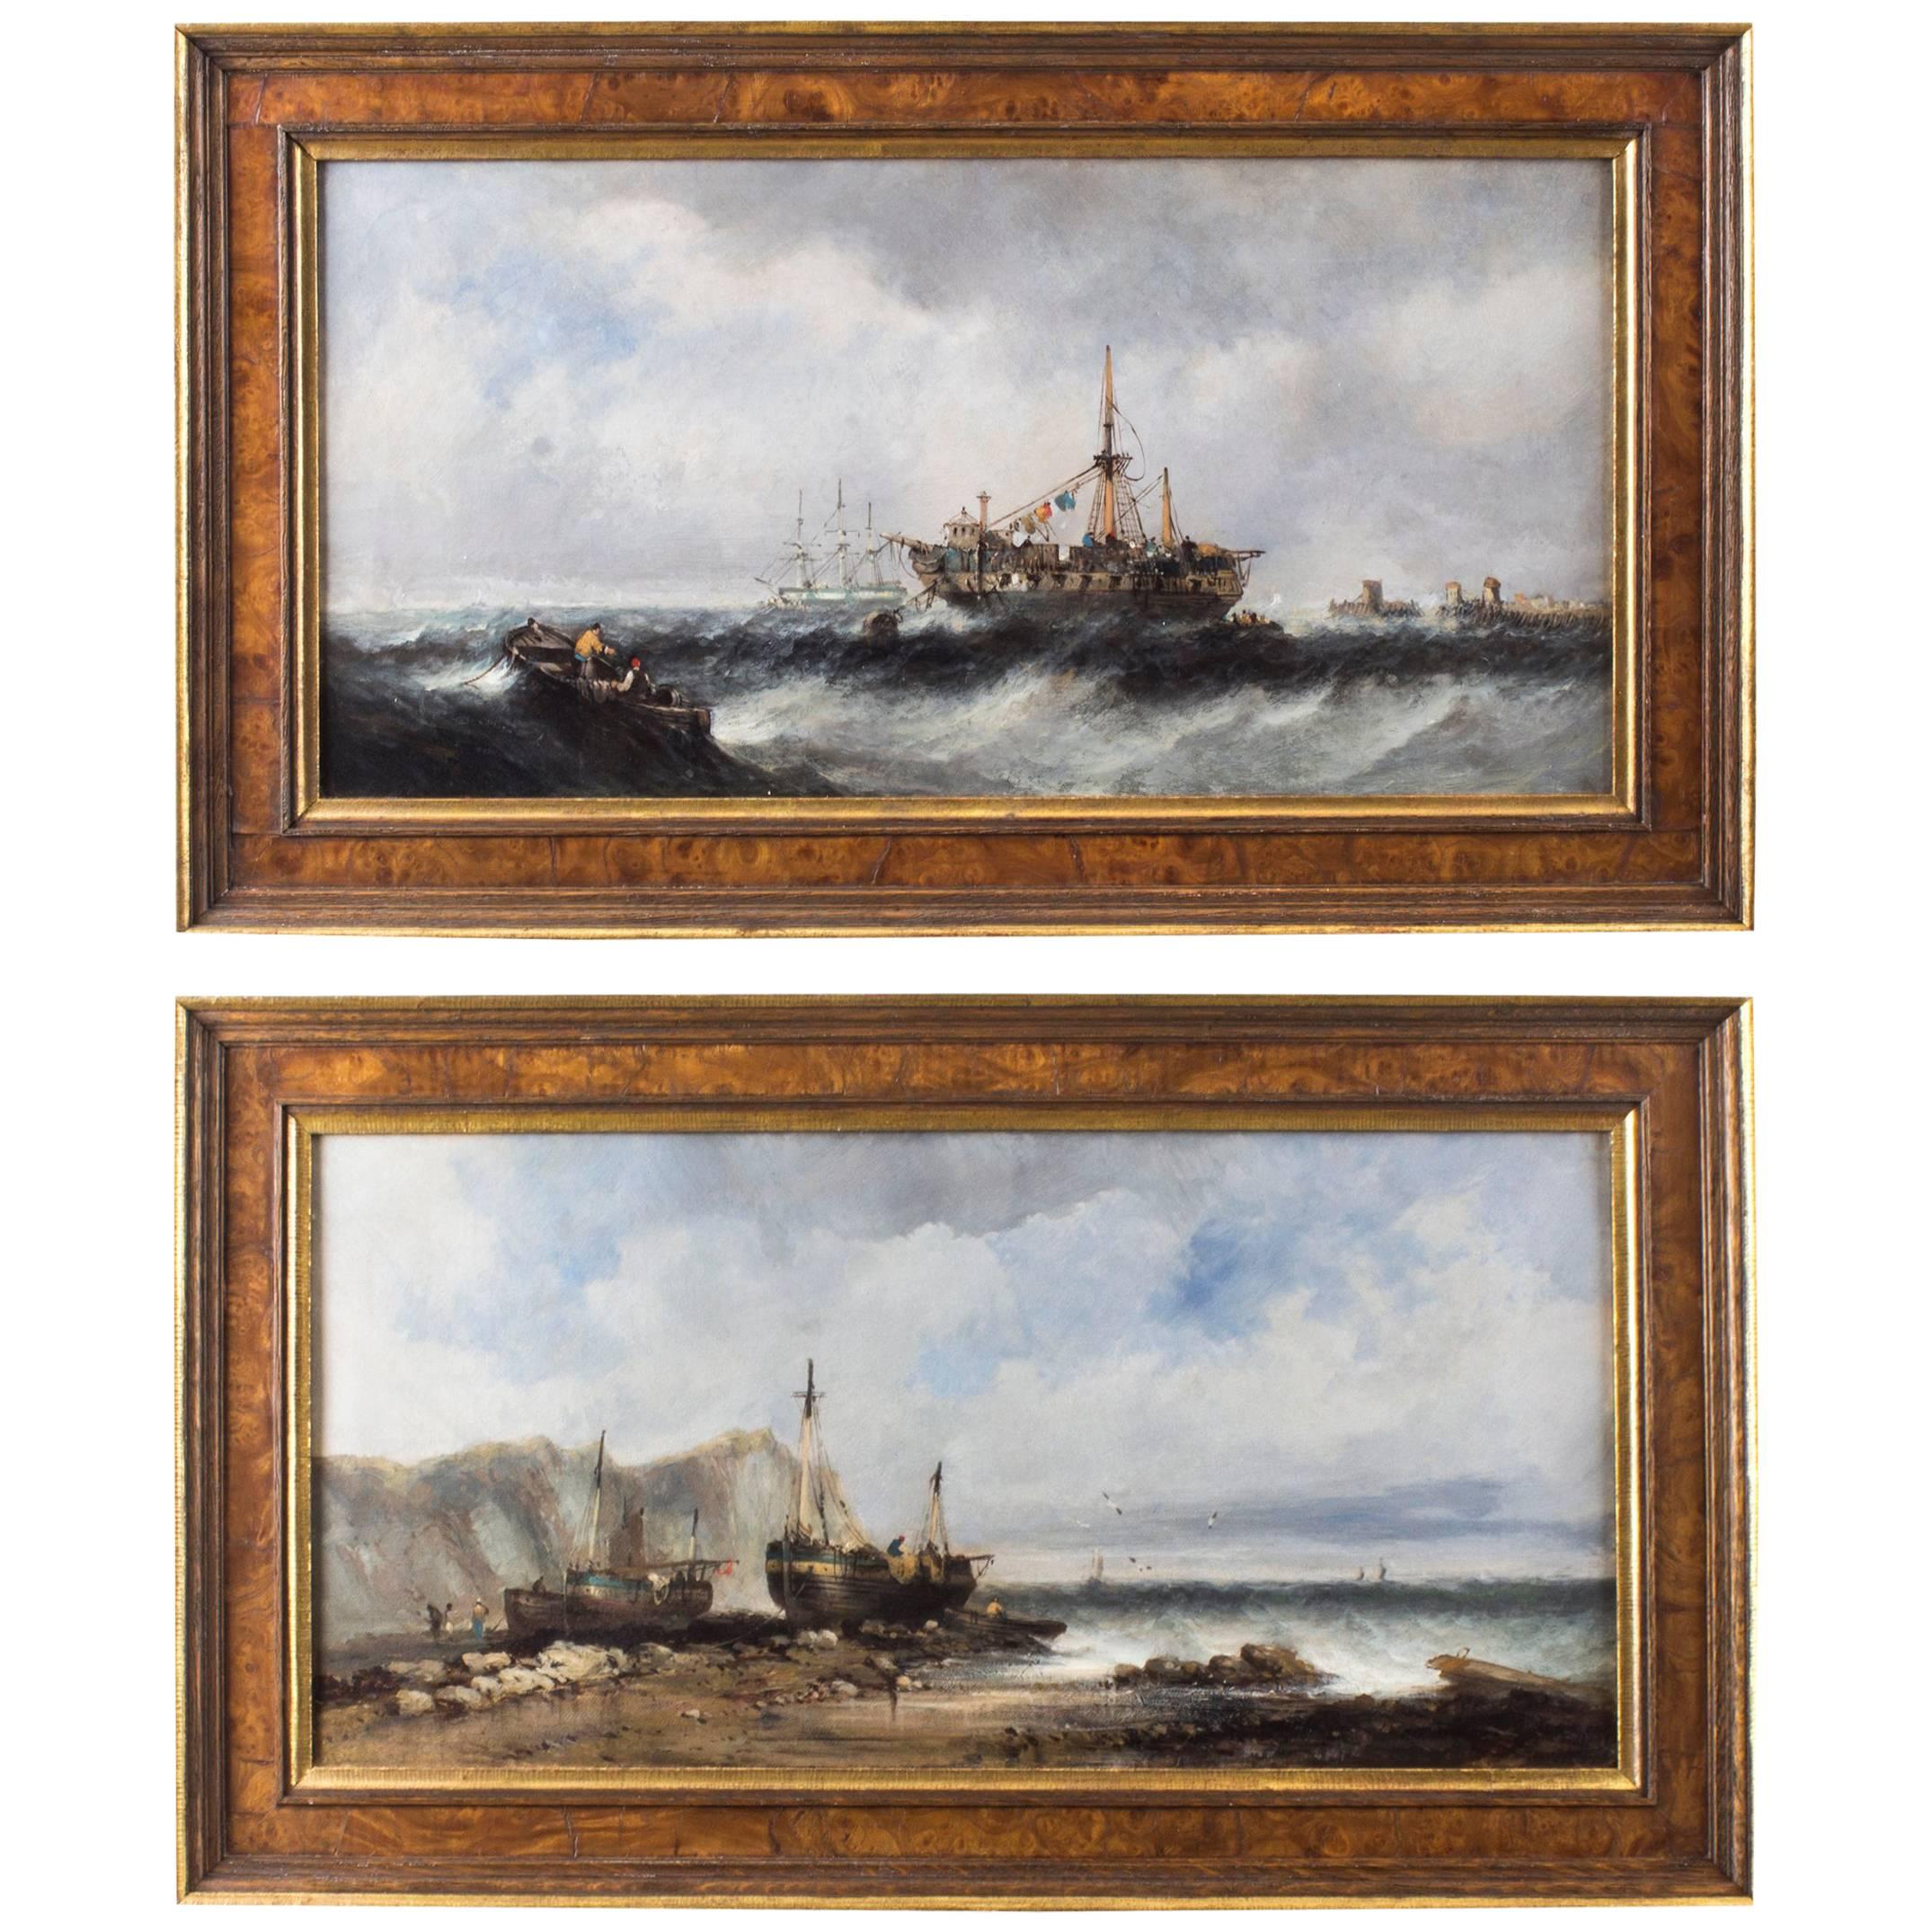 Antique Pair of Seascape Oil Paintings Fishing Boats, 19th Century